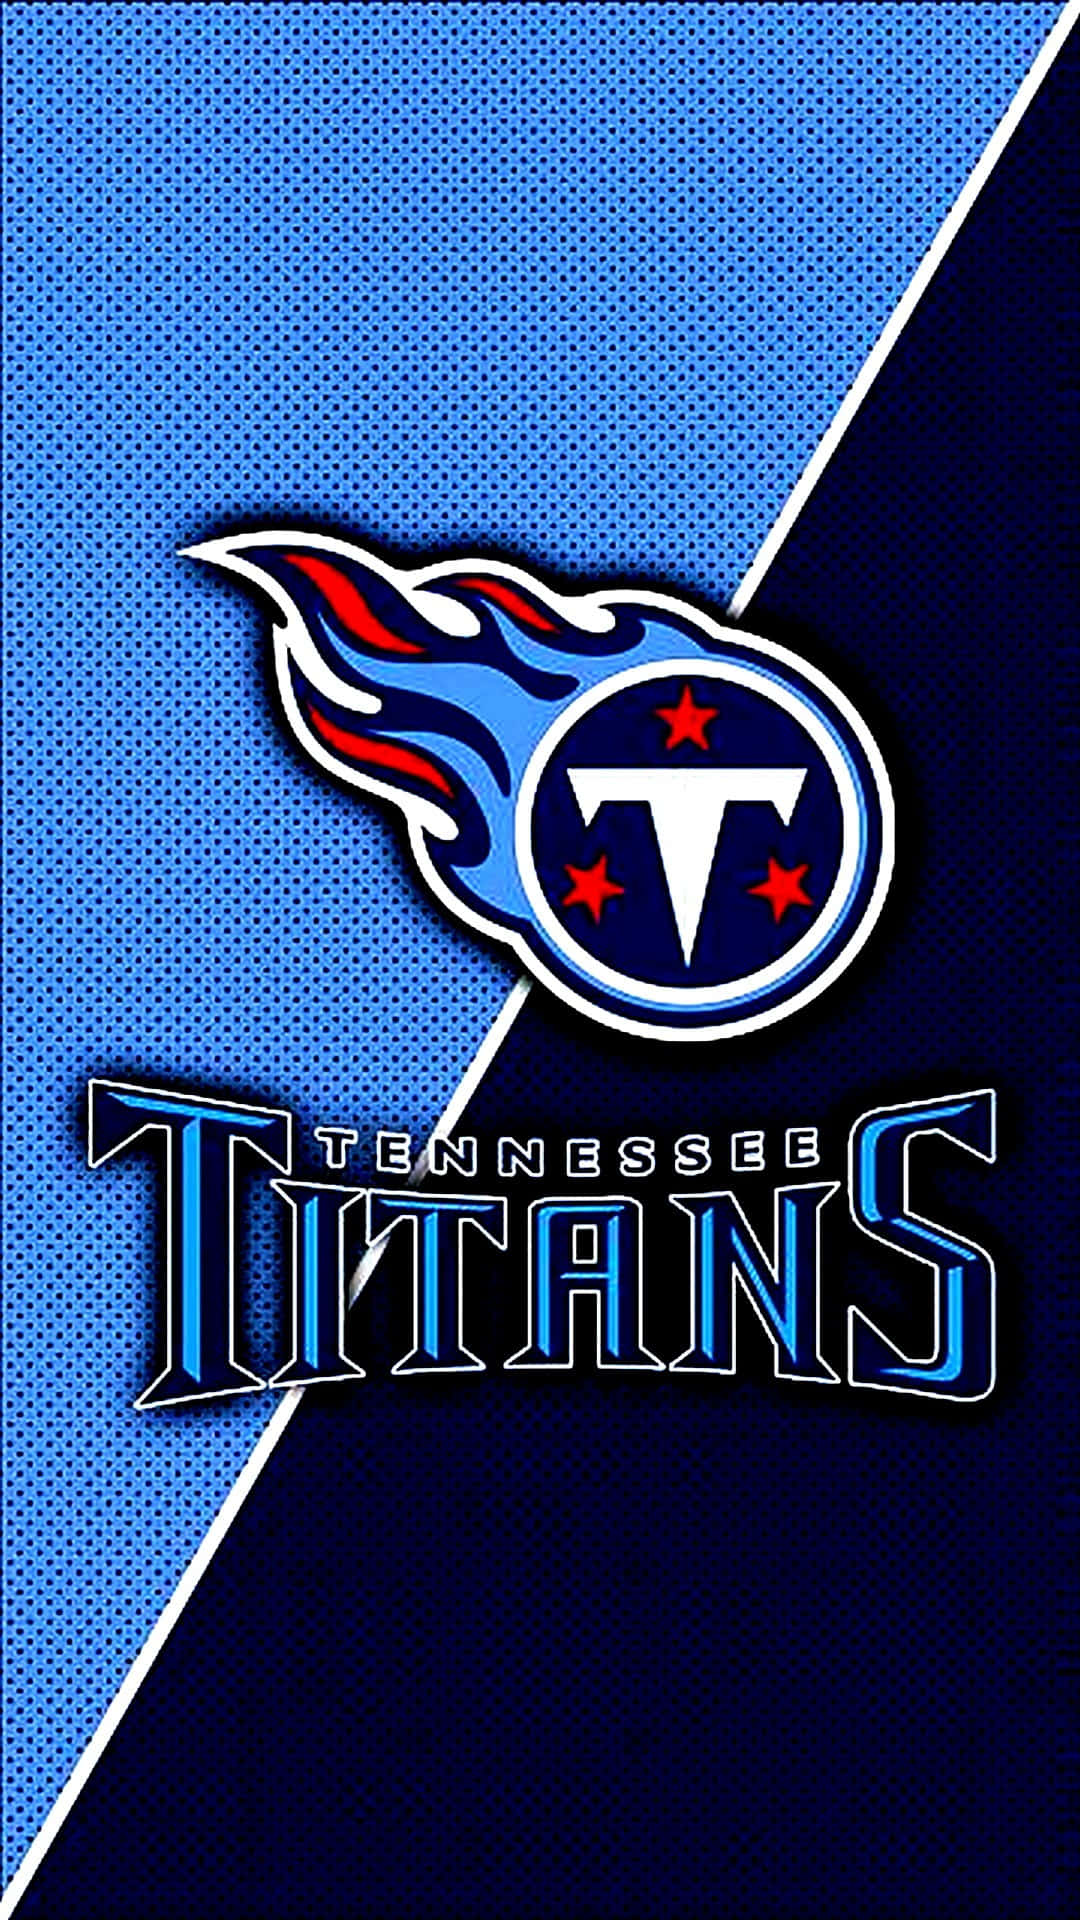 Tennessee Titans pride displayed in every pocket. Wallpaper